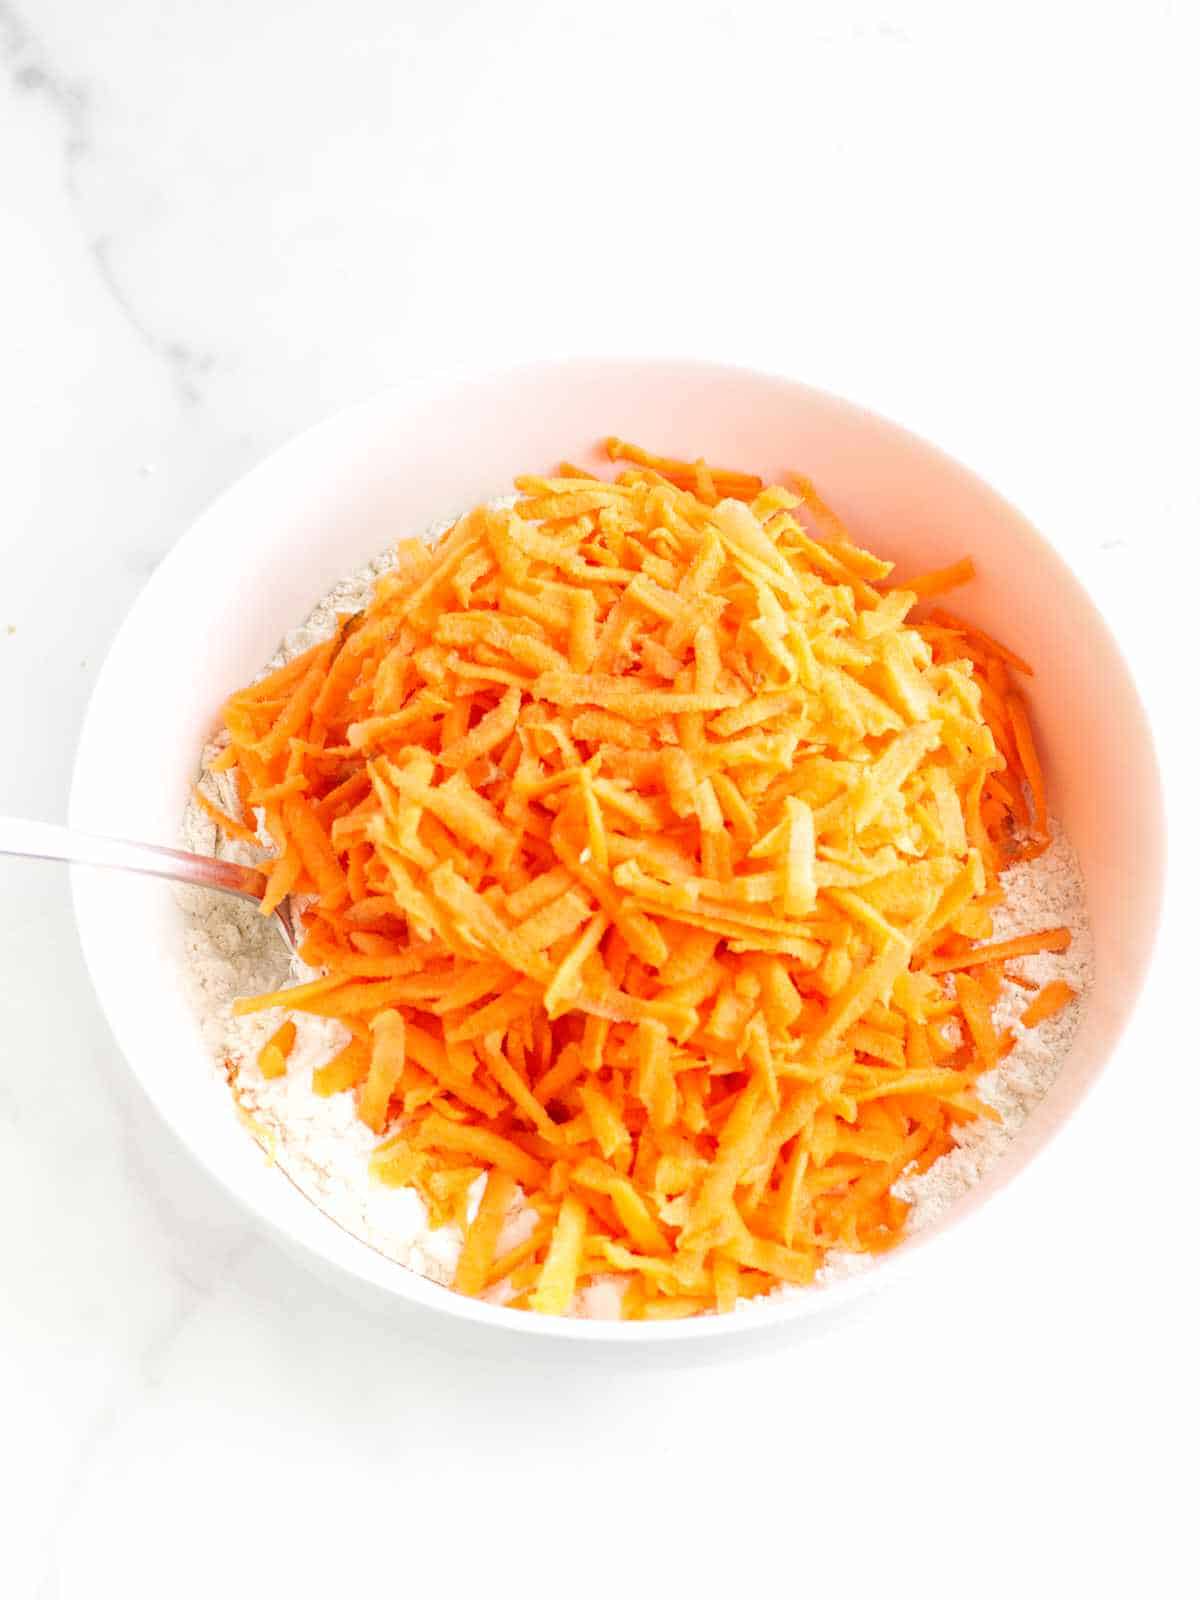 grated carrots in a bowl on top of flour.